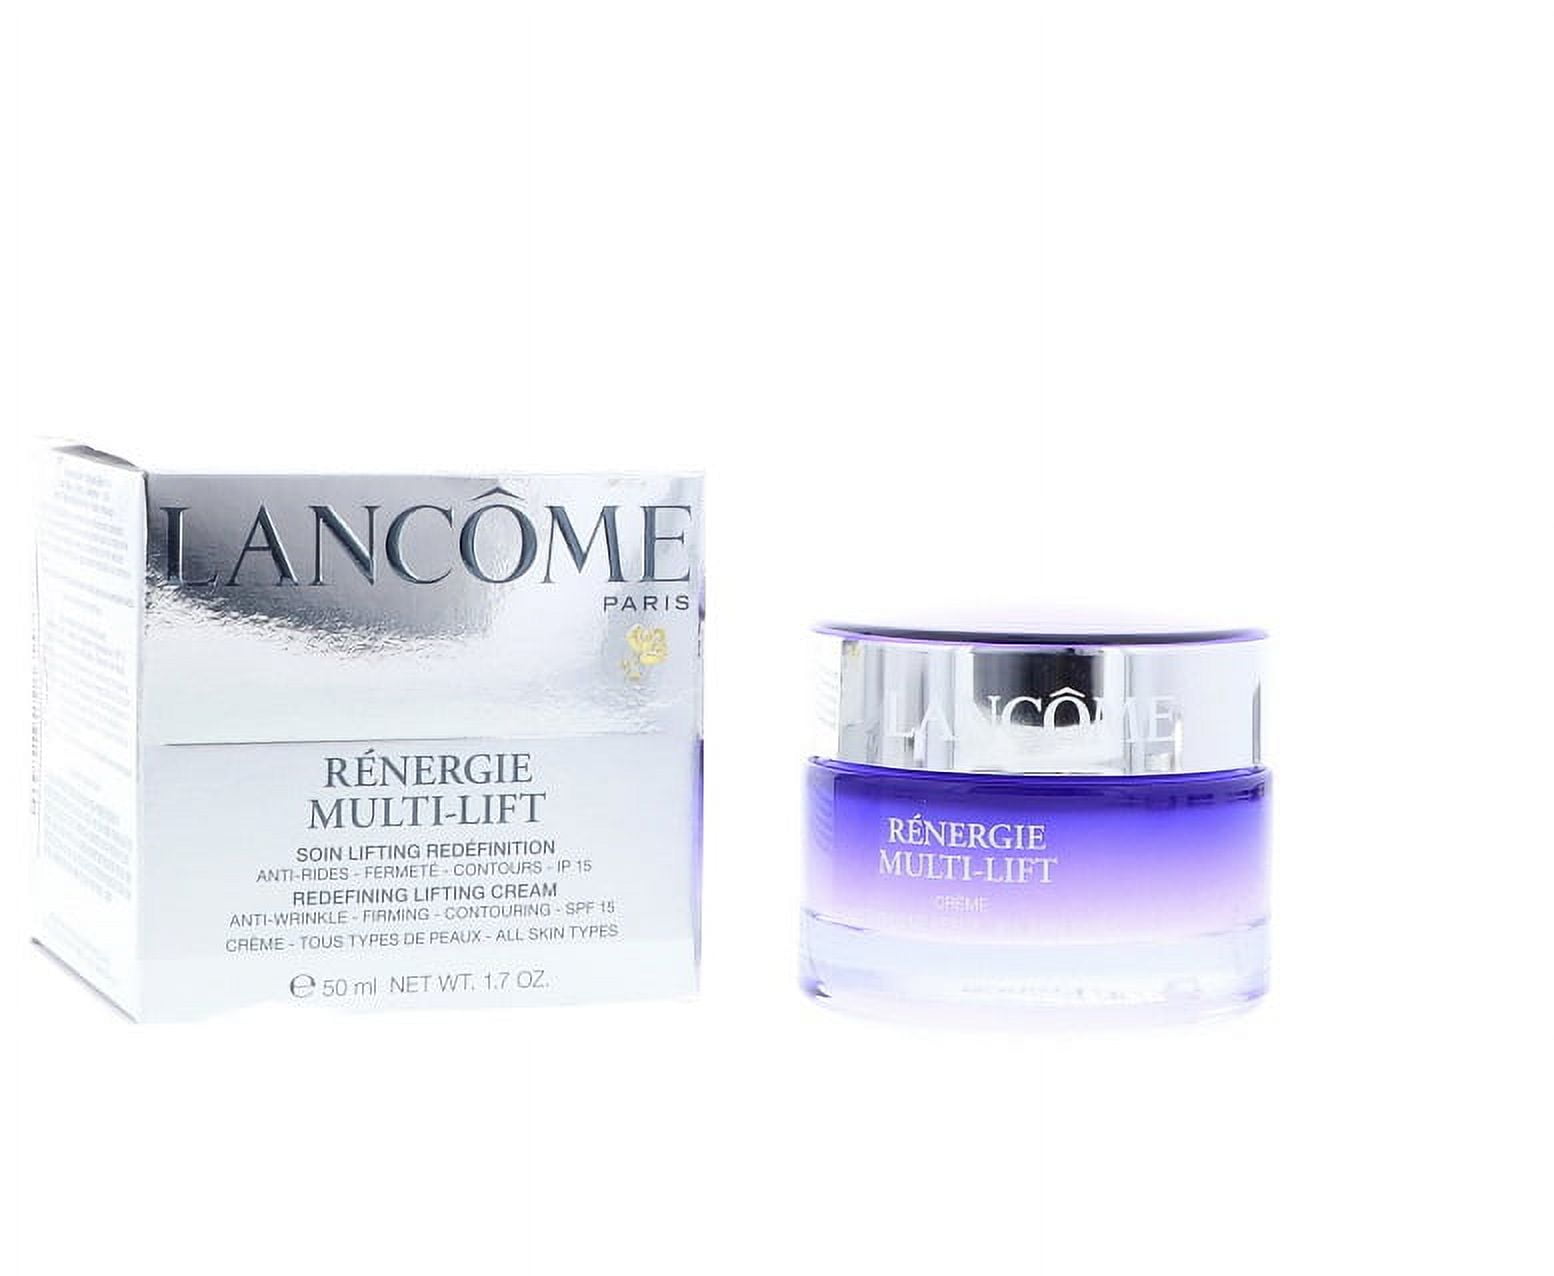 Lancome Renergie All Multi-Lift for Cream 1.7 Types, Skin oz